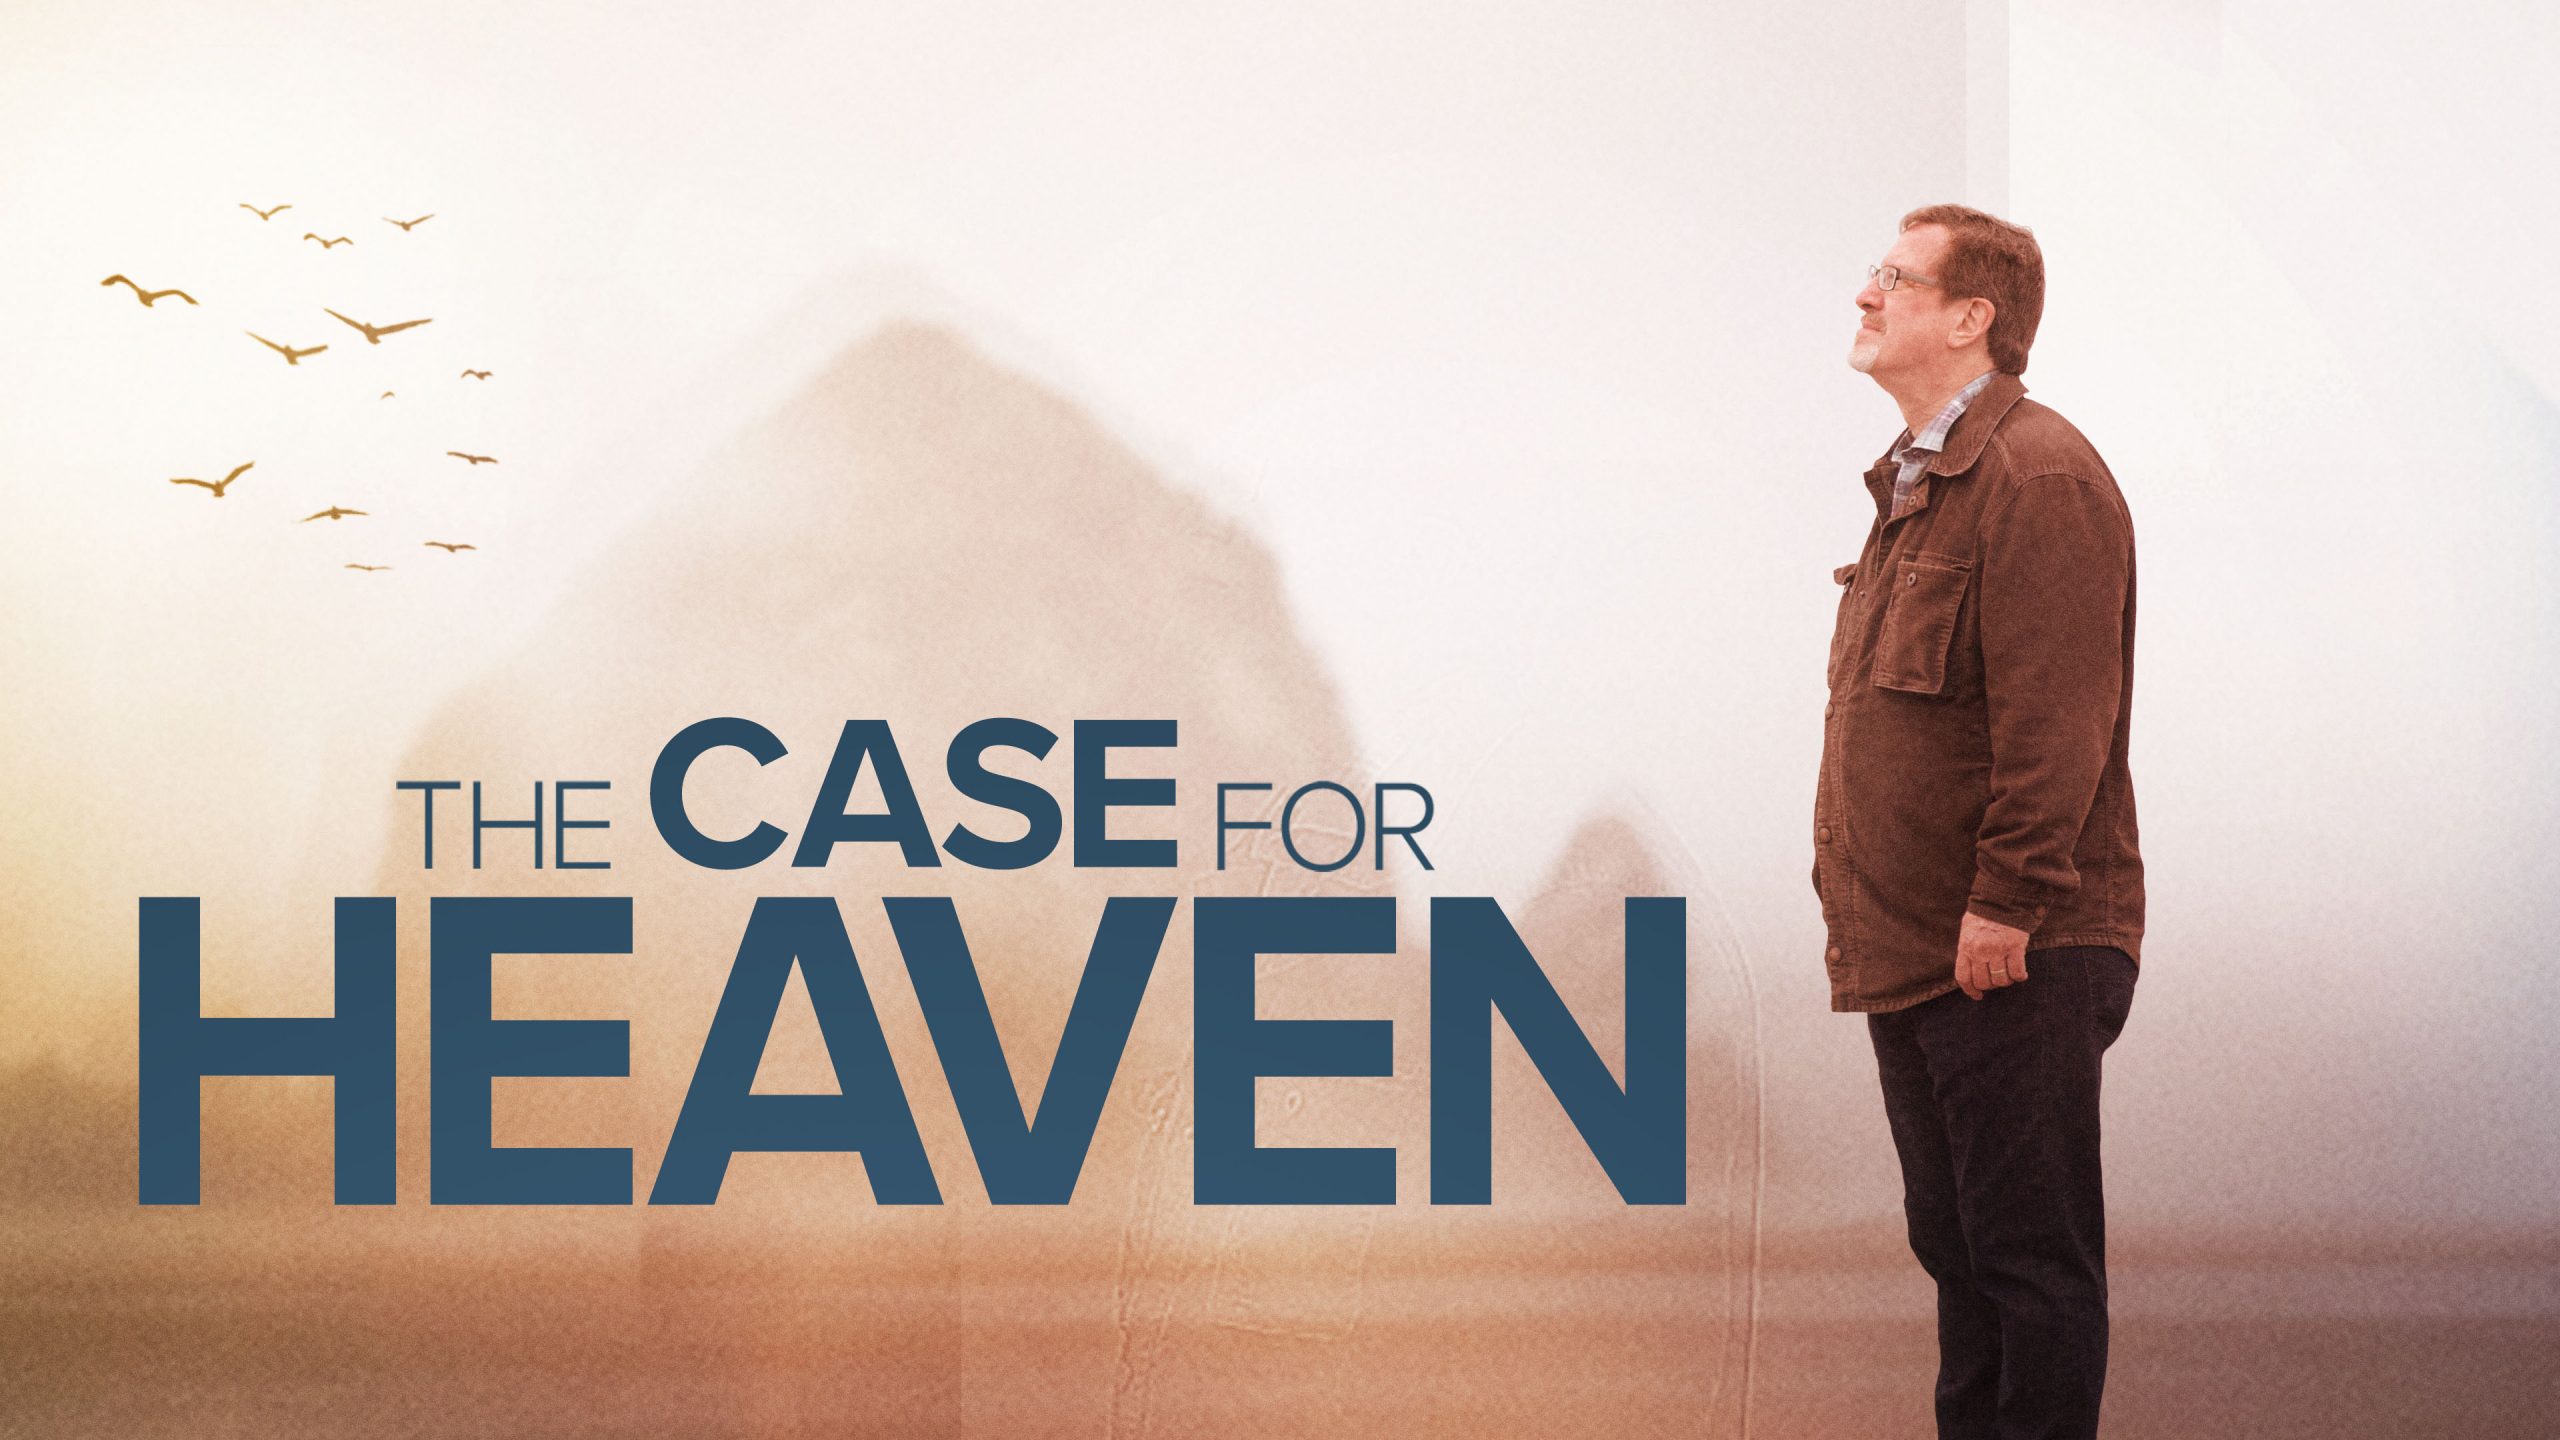 ‘THE CASE FOR HEAVEN,’ NEW DOCUMENTARY FROM BEST-SELLING AUTHOR LEE STROBEL, RELEASING EXCLUSIVELY ON PURE FLIX JULY 15